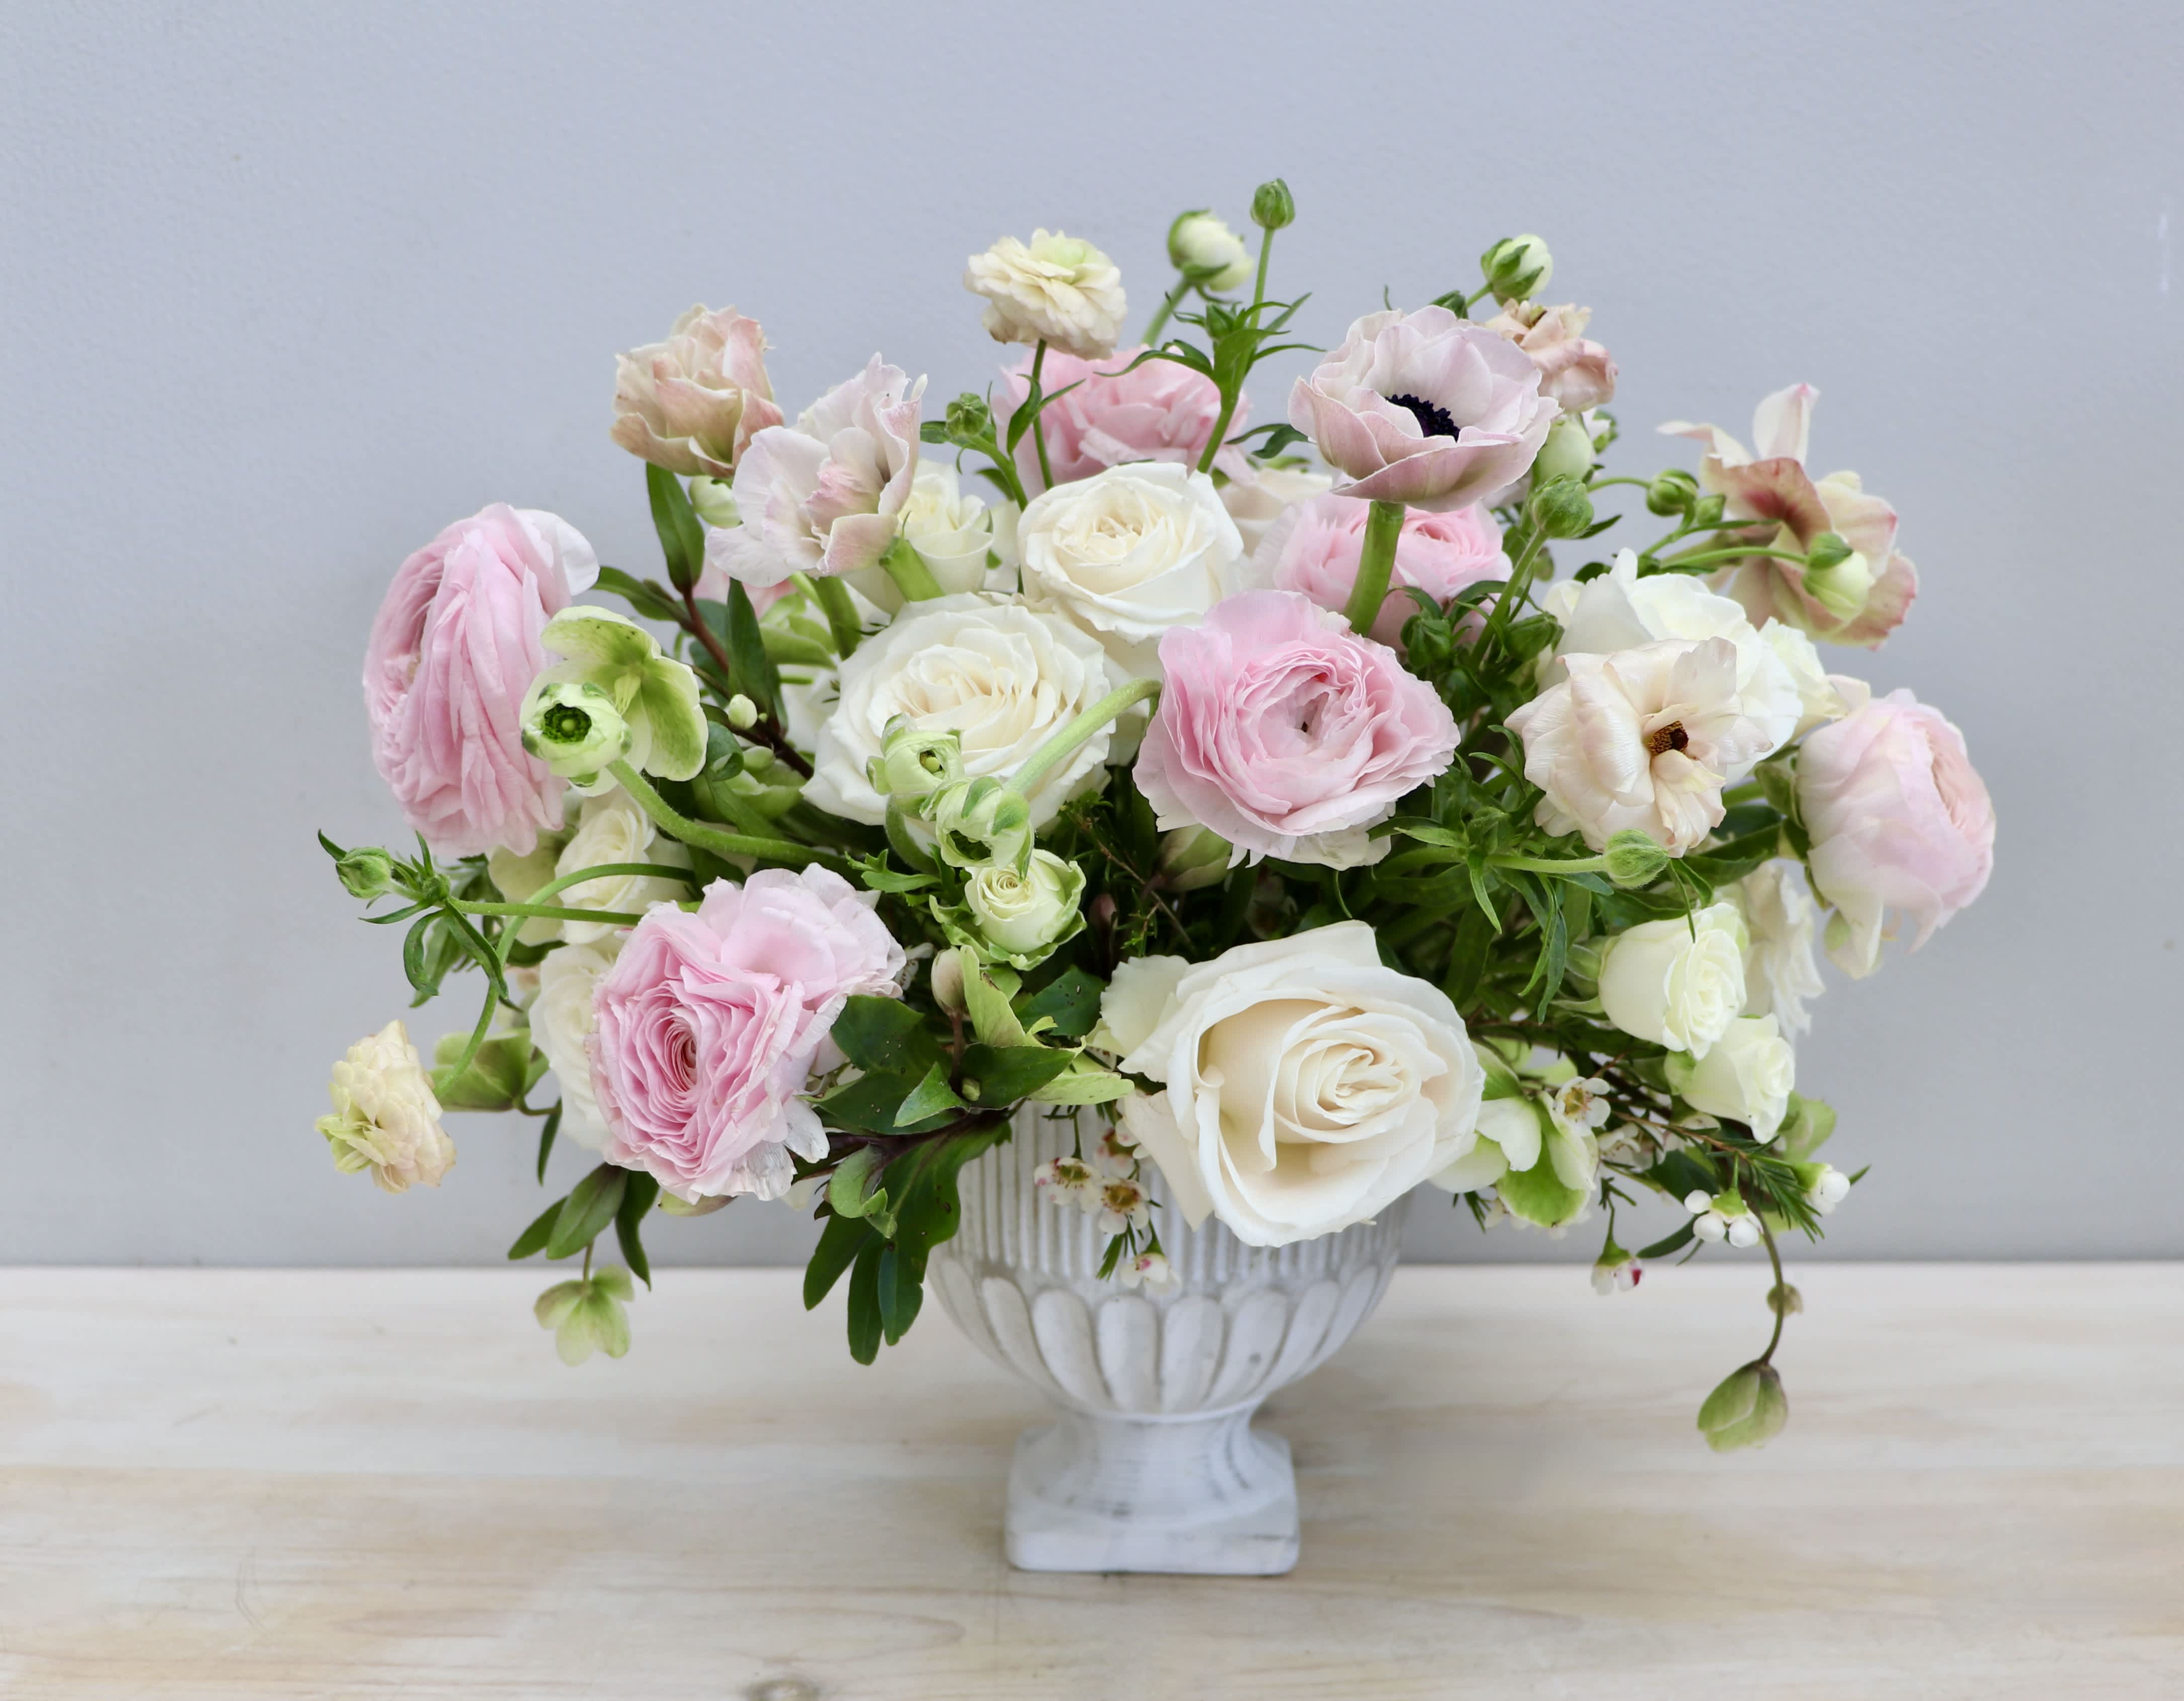 Blush Beauty - My Glendale Florist - Blush Beauty is made with a mix of our favorite light pink and white flowers in this classic stone vessel. This arrangement includes light pink ranunculus, anemone, hellabore, and white large and small roses.